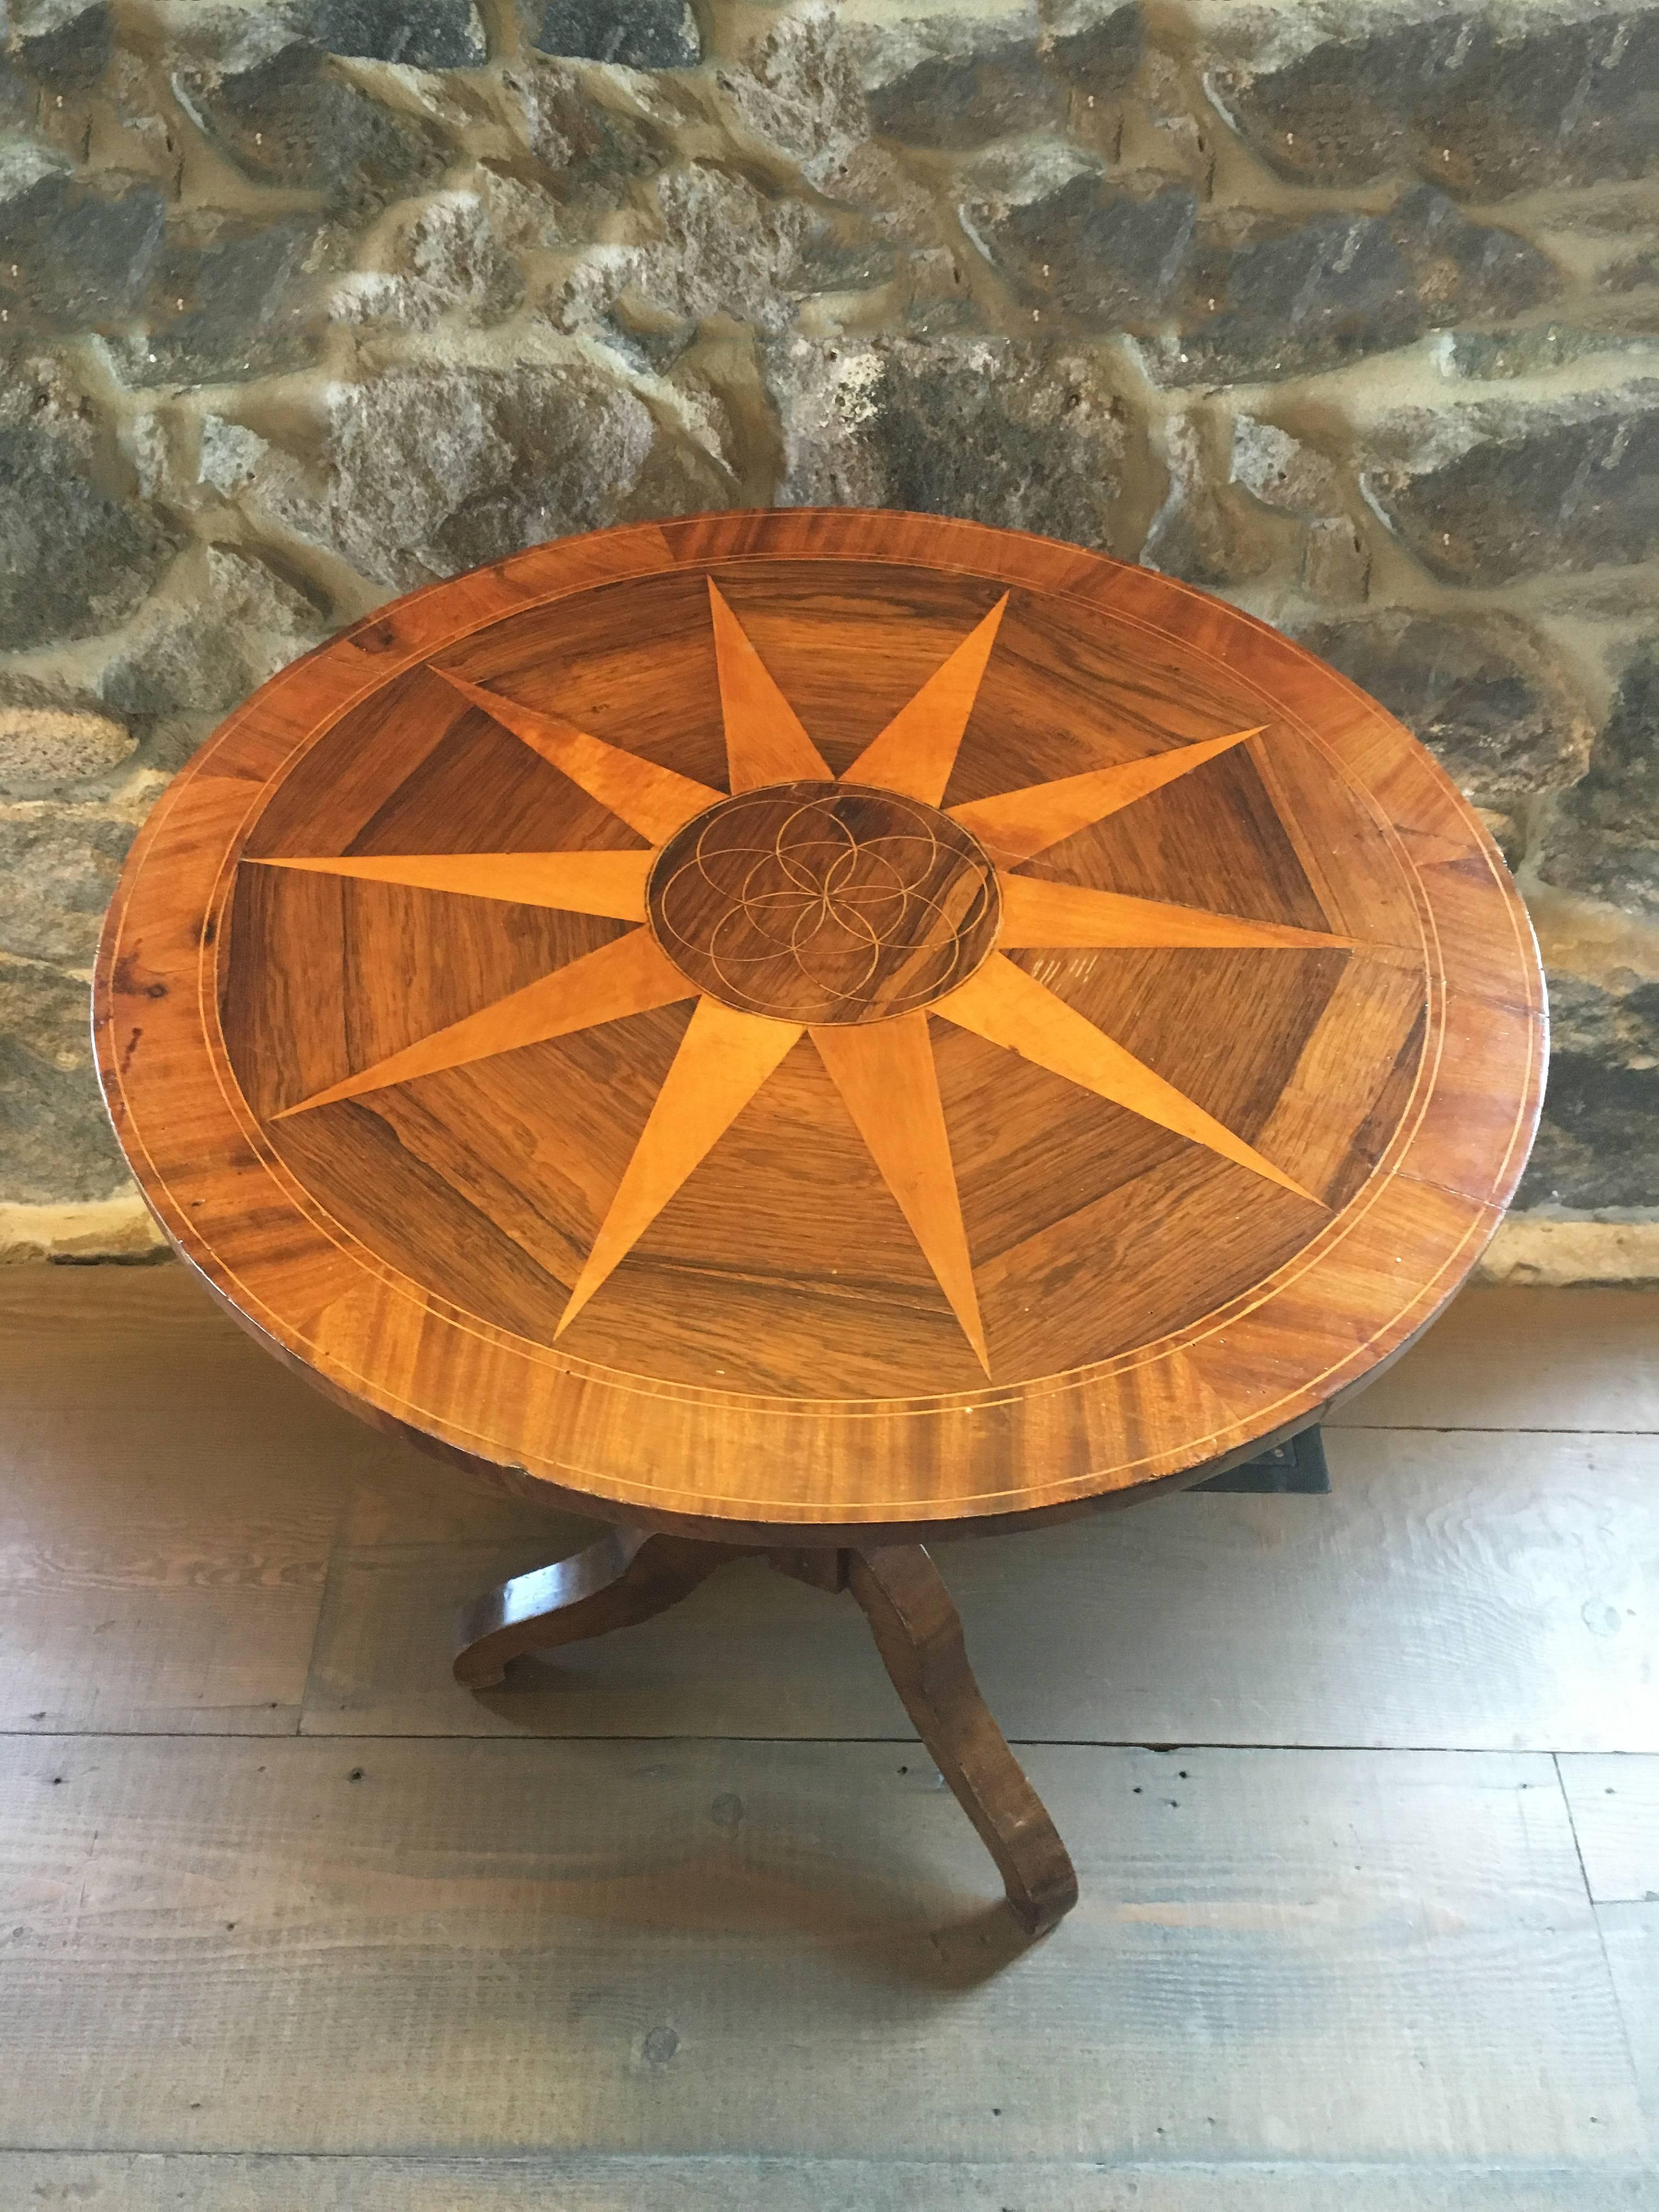 Vintage hinged marquetry side table with star and elliptical motif. Hexagonal pedestal base with three legs.